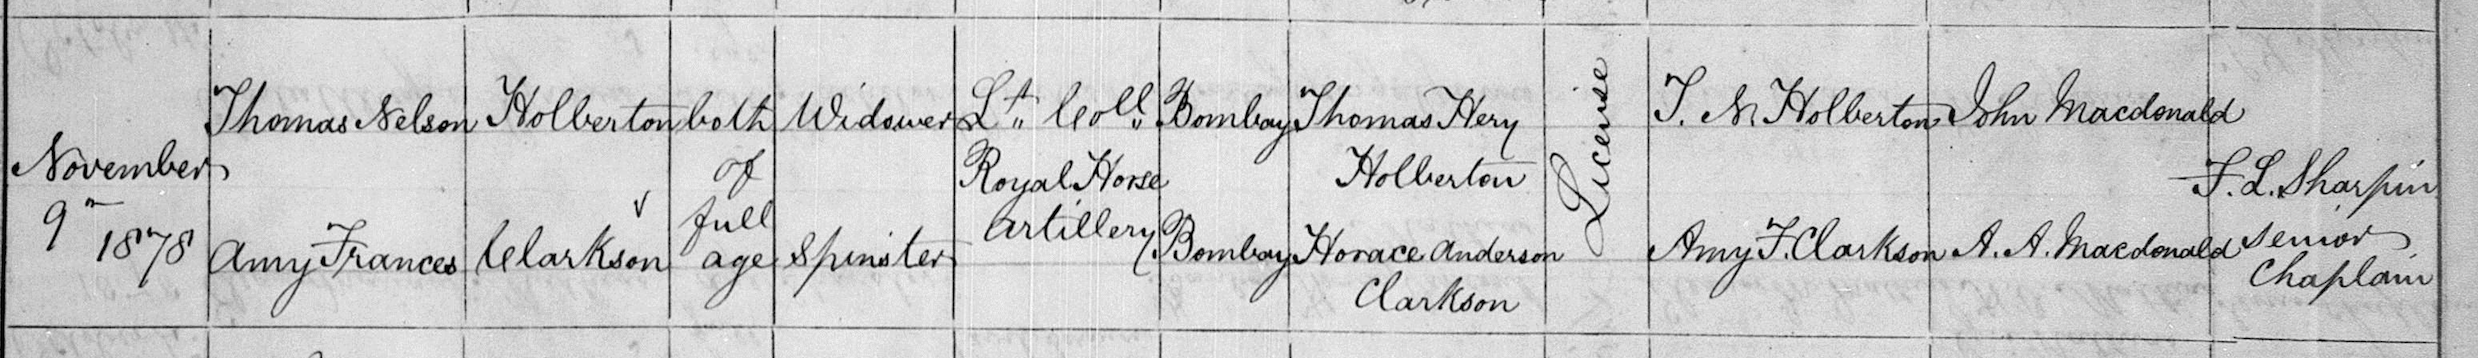 Thomas Nelson Holberton and Clarkson Marriage